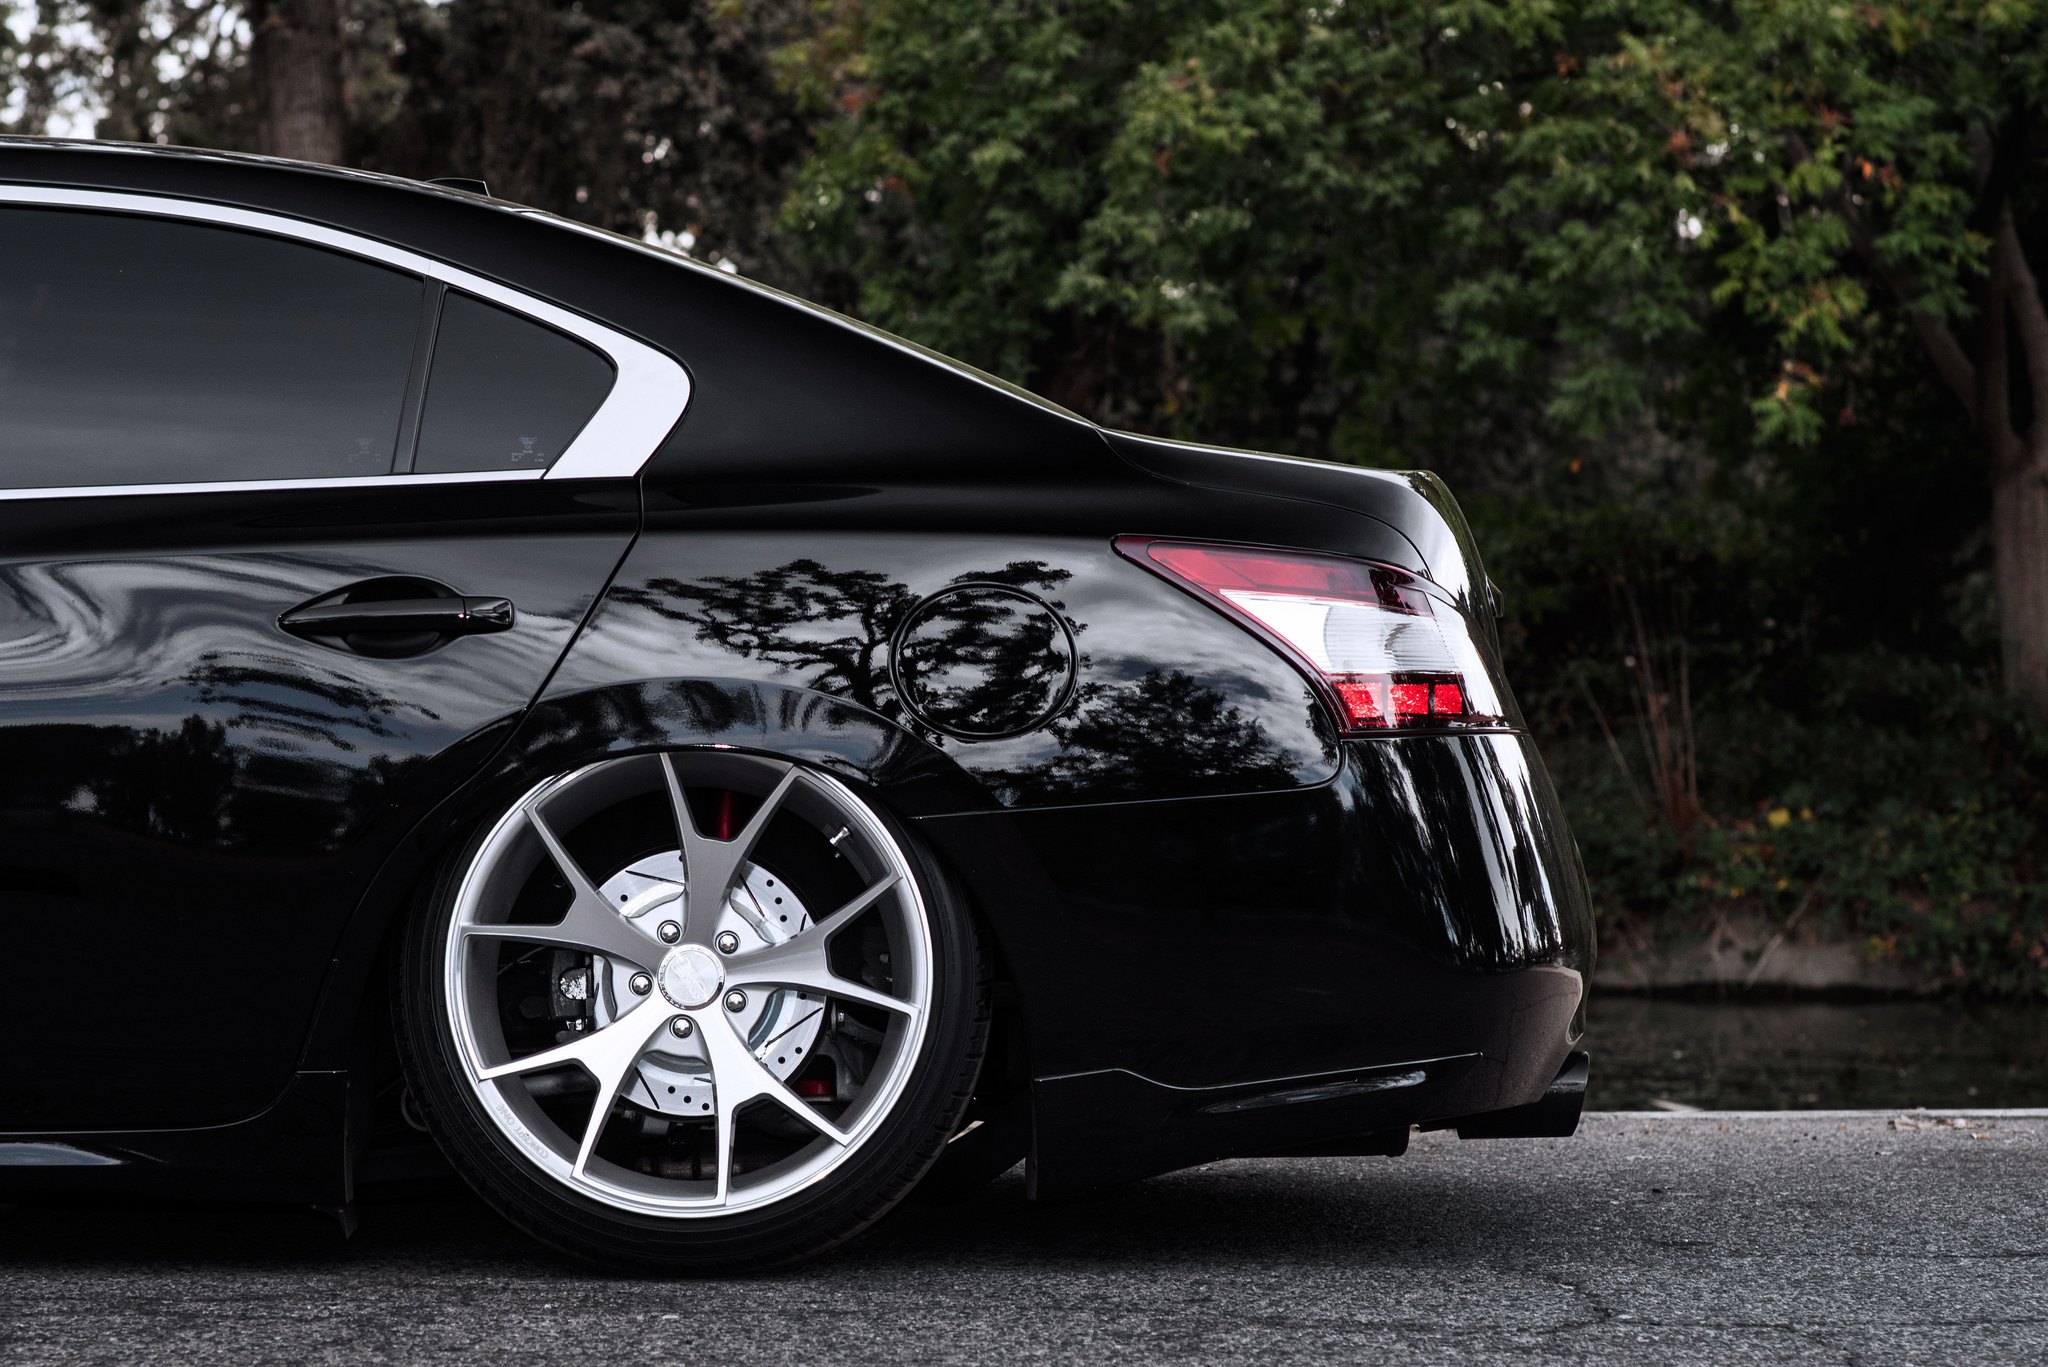 Chrome Concept One Wheels on Black Nissan Maxima - Photo by Concept One